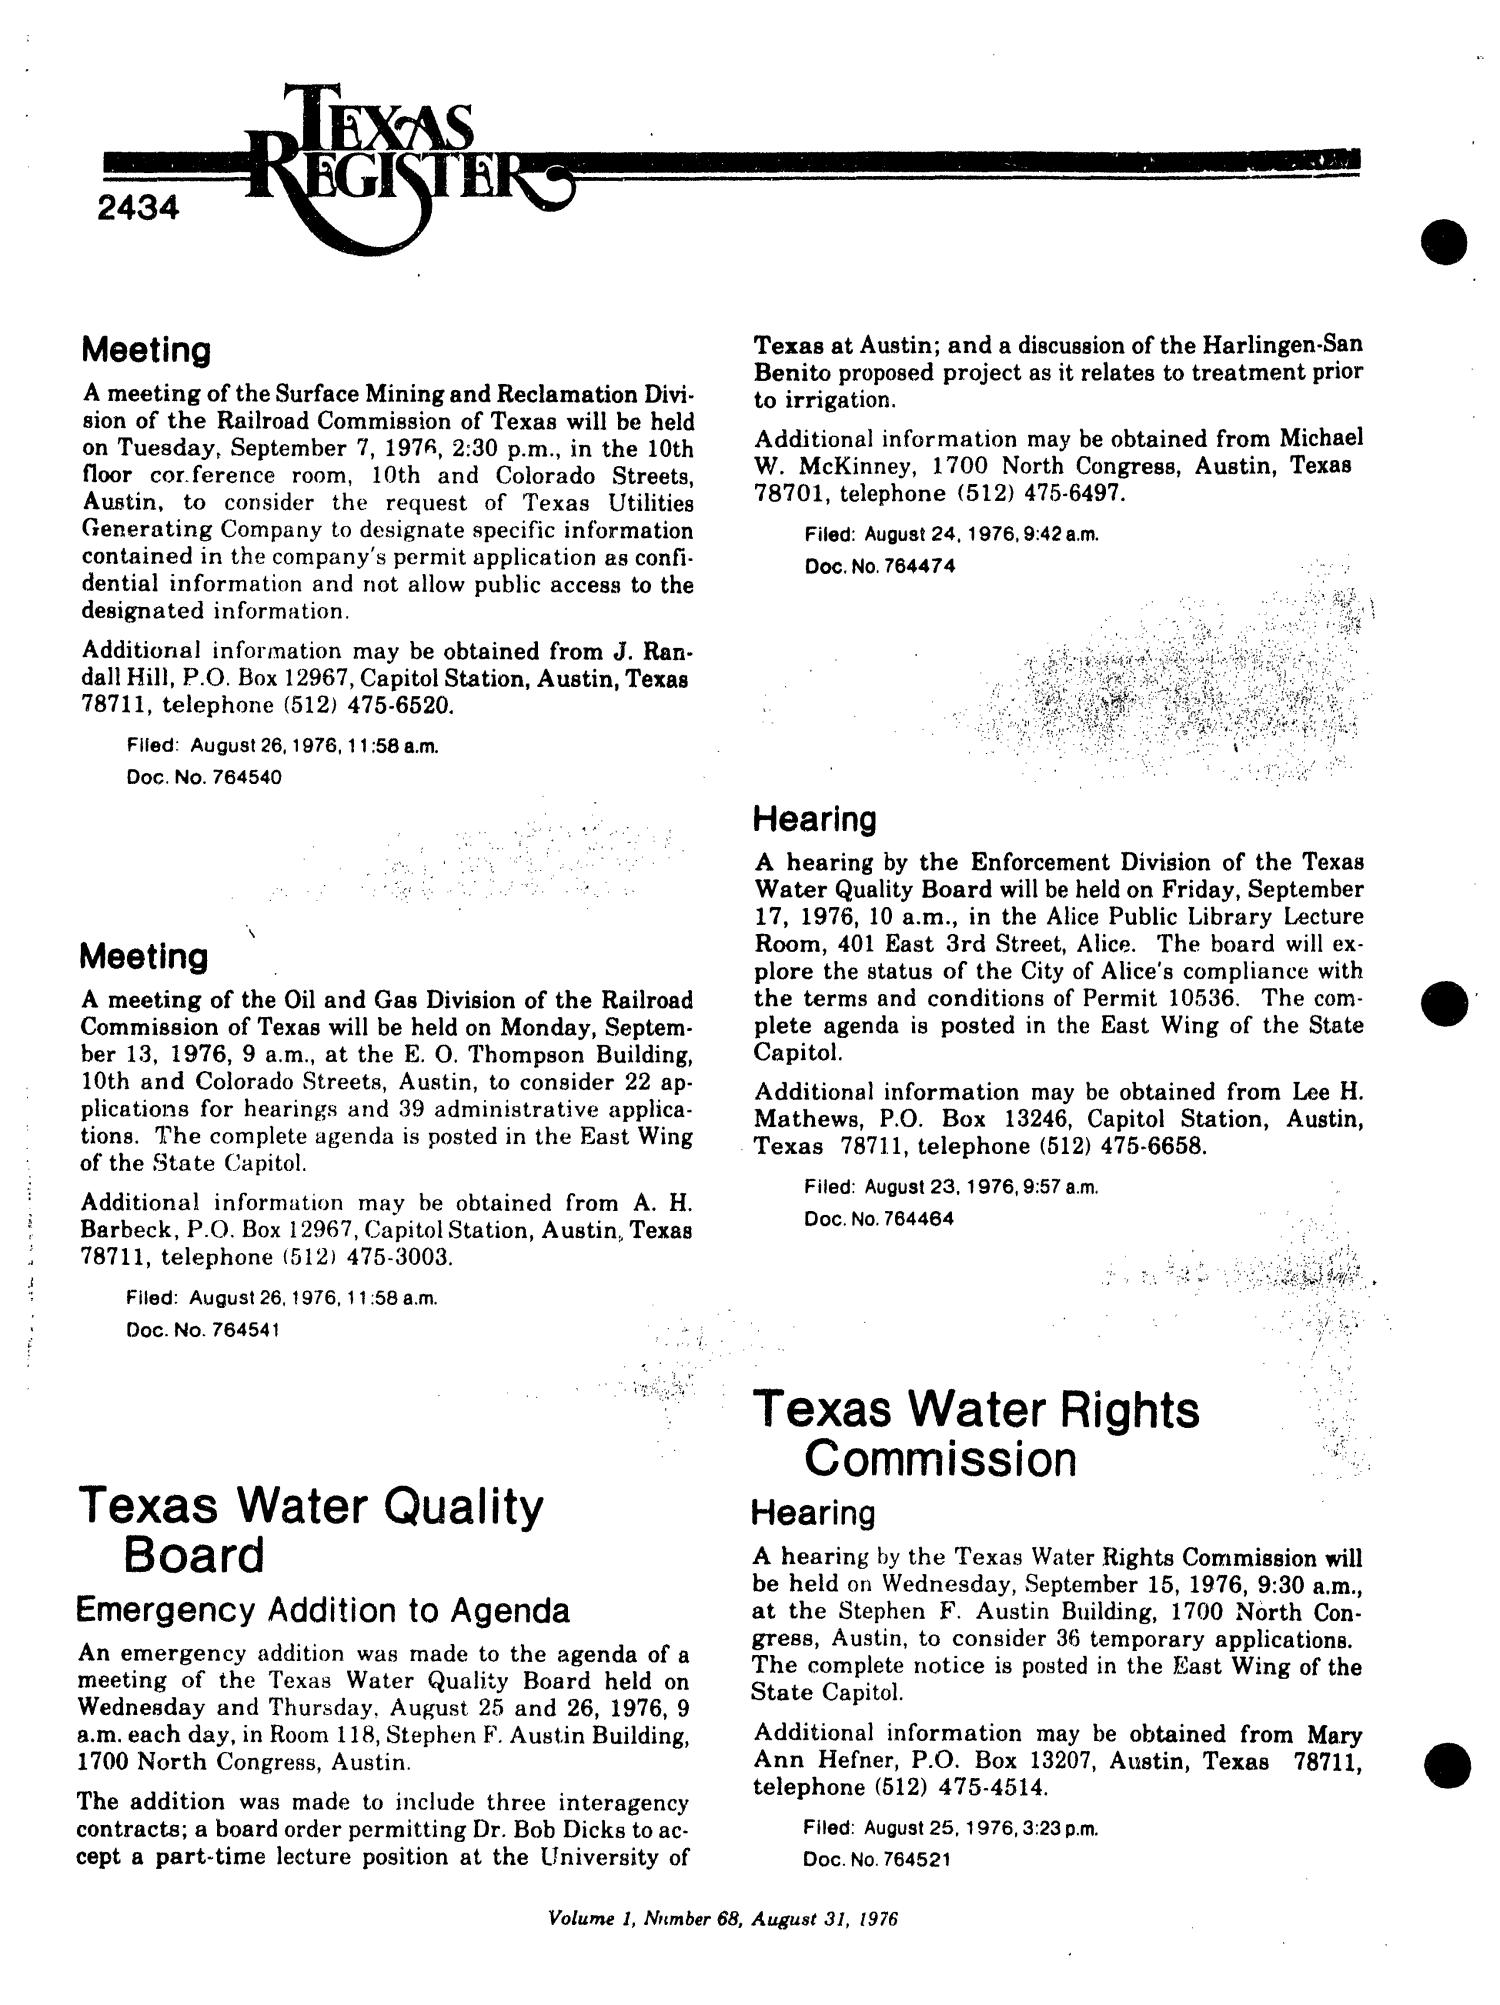 Texas Register, Volume 1, Number 68, Pages 2393-2438, August 31, 1976
                                                
                                                    2434
                                                